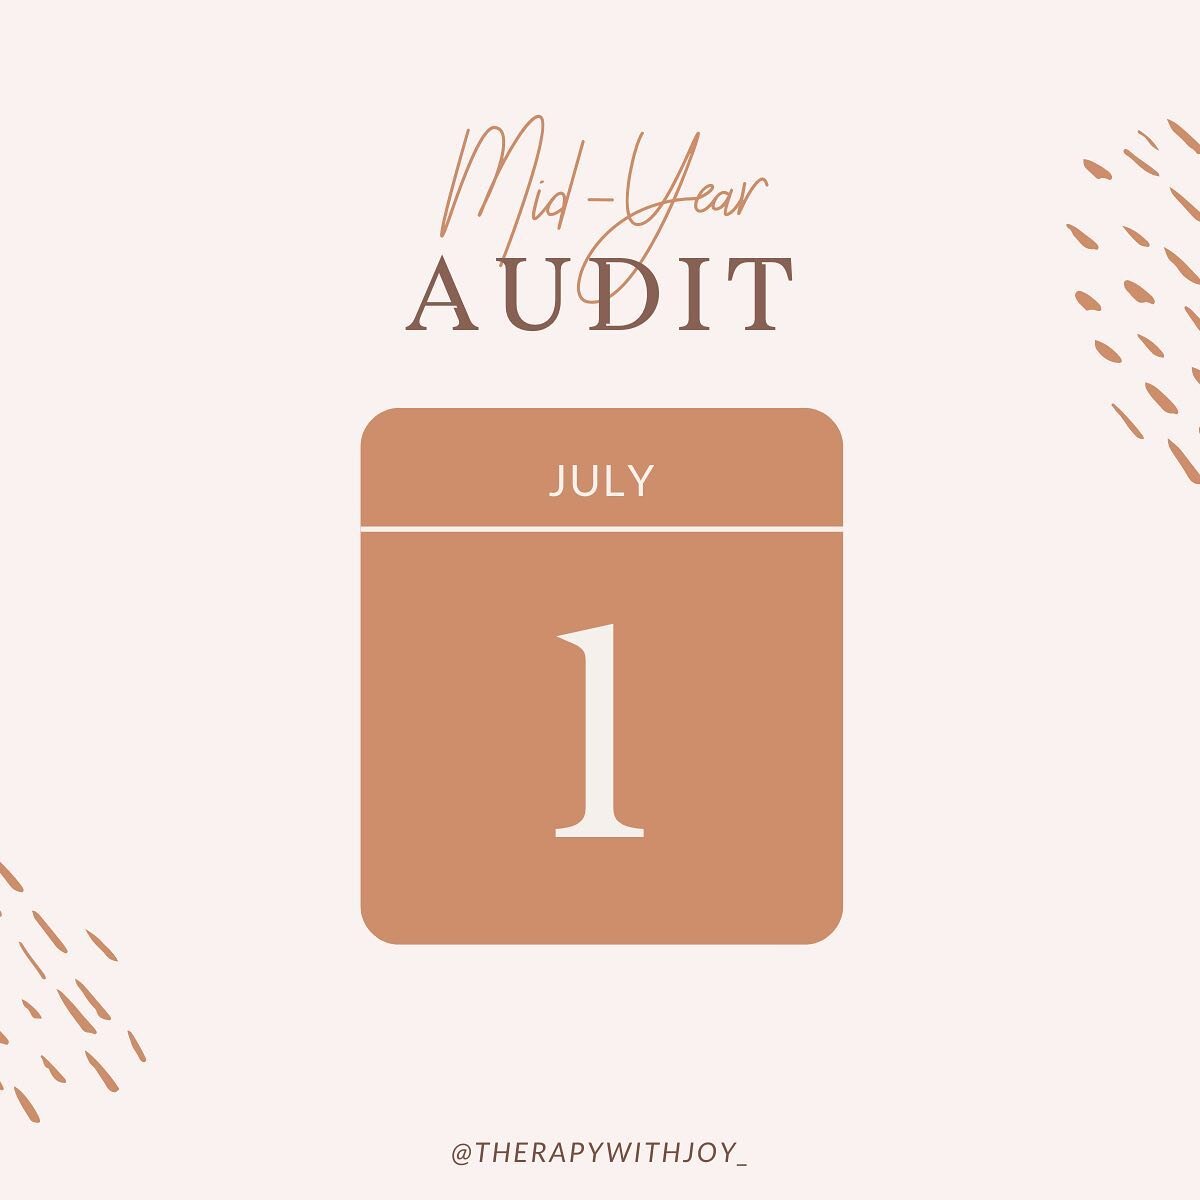 It&rsquo;s a new month and July marks us being half way through 2022 (time is flying).

Here are a few check in questions you can use to help you have an intentional second half of the year. 

1. Am I being mindful of the progress I&rsquo;ve made?
2.